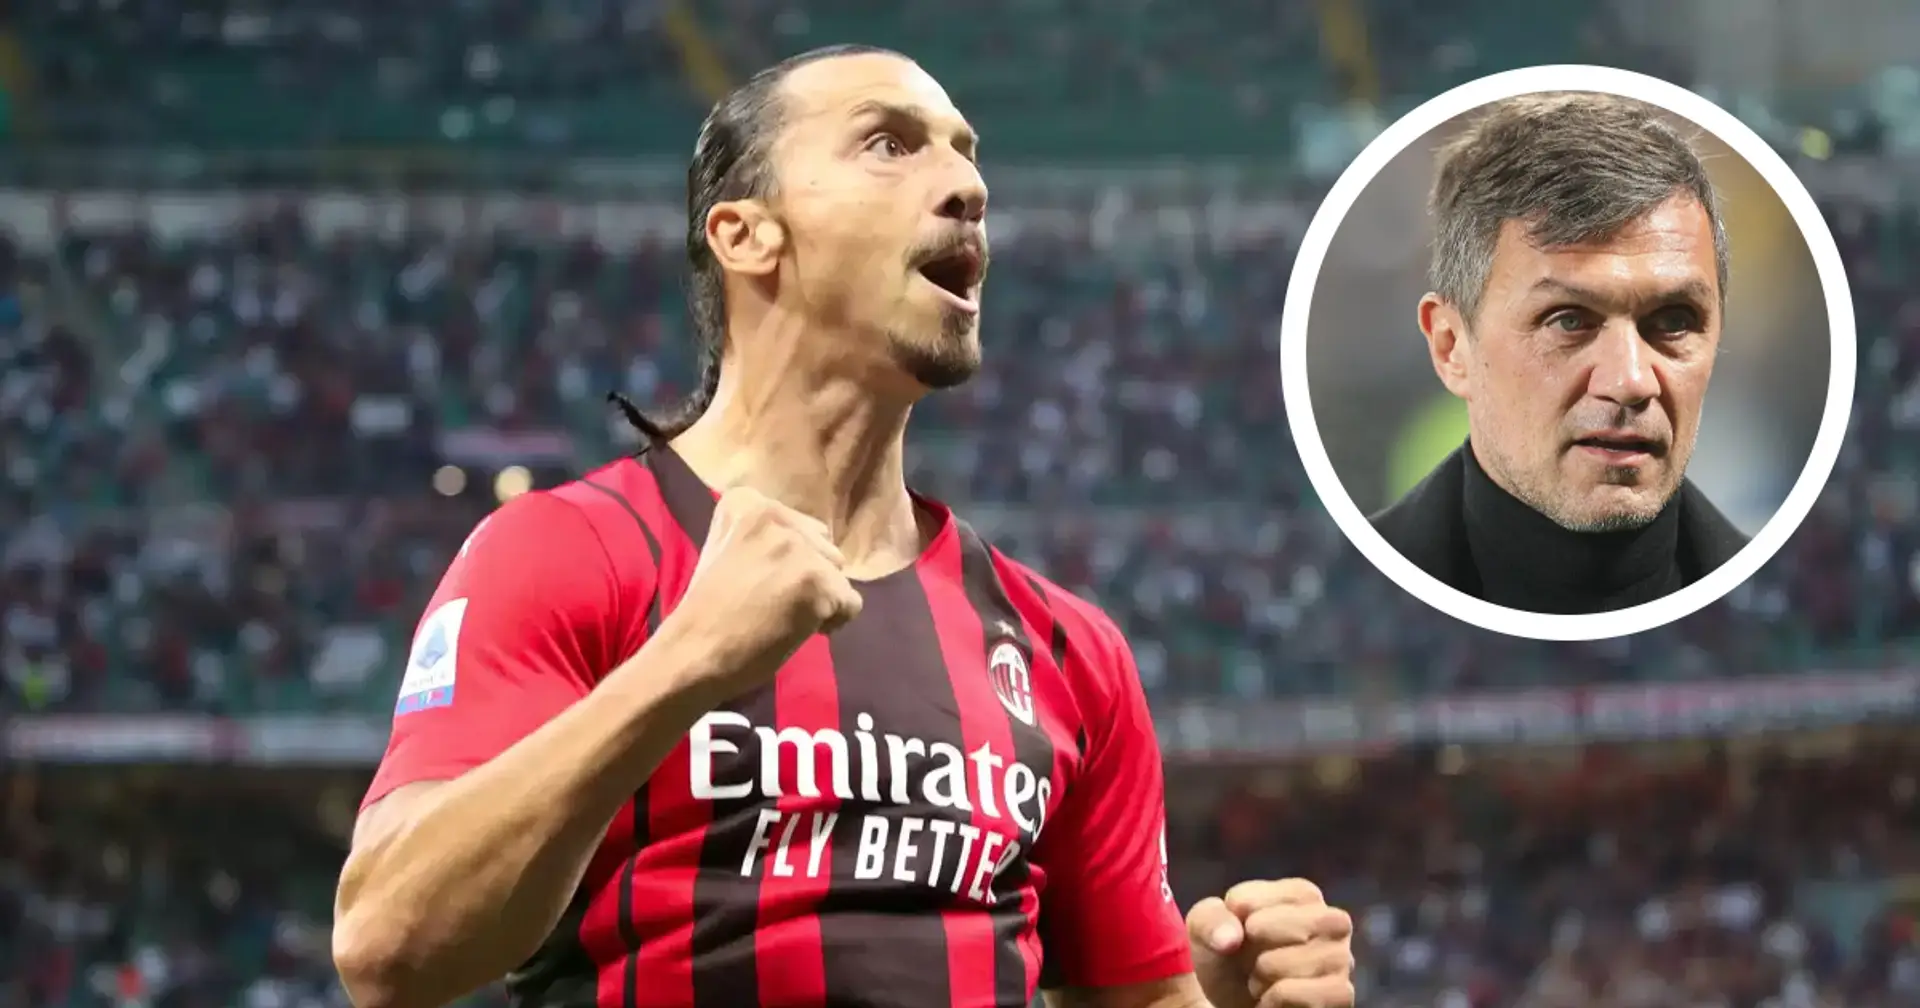 'It’s up to him': Paolo Maldini confirms 40-year-old Zlatan Ibrahimovic can stay at AC Milan for another season